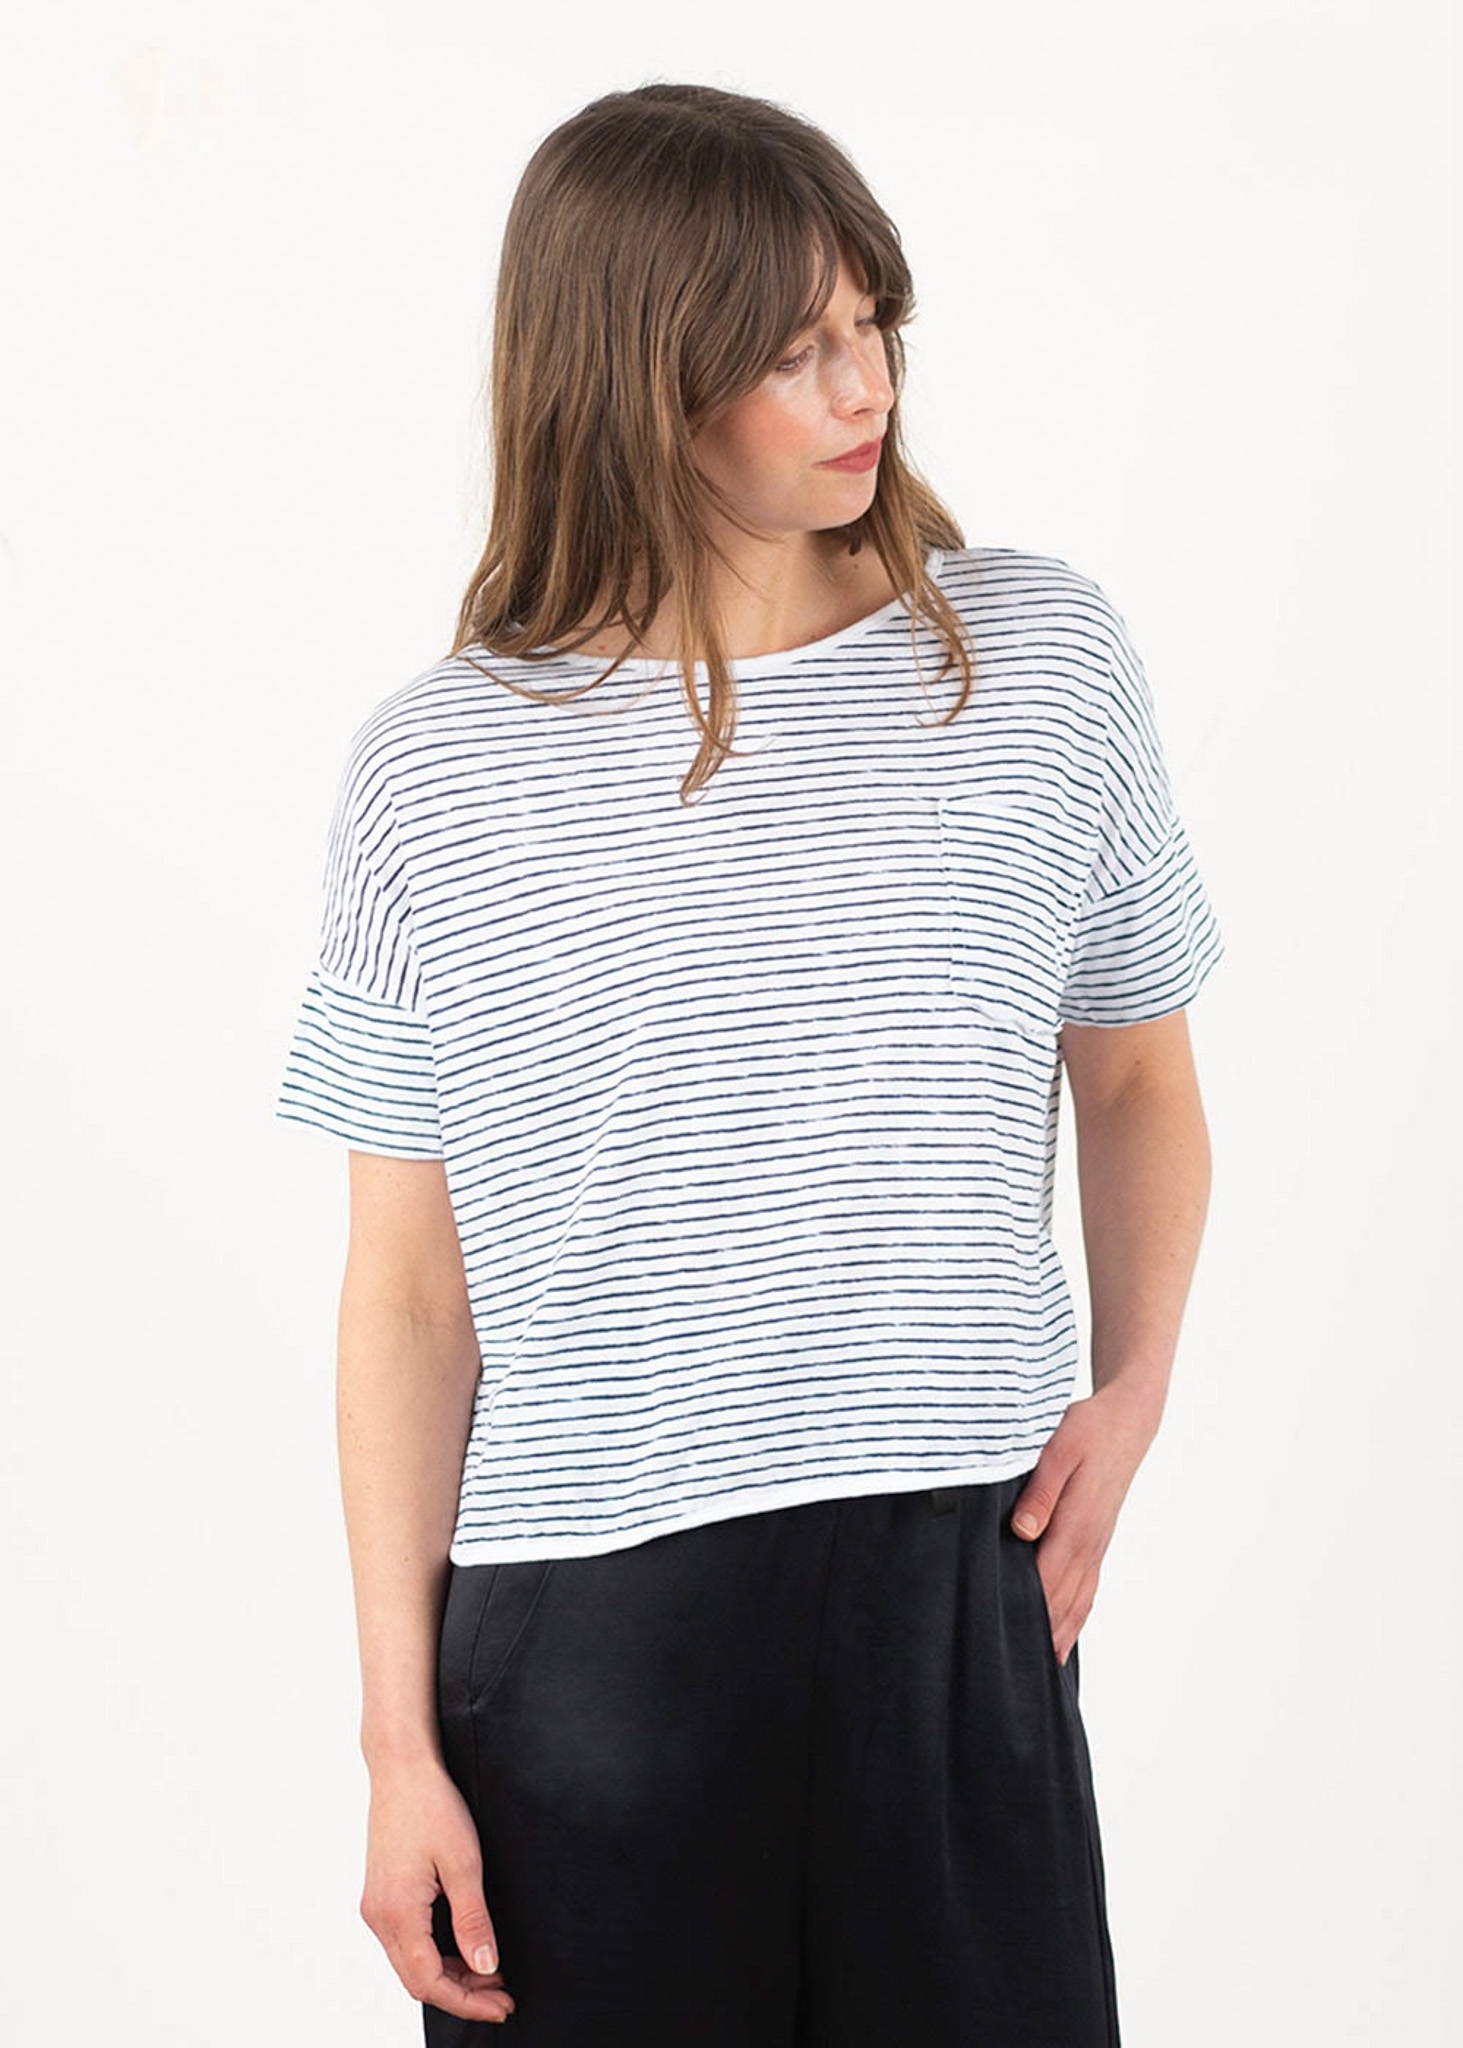 A model wearing a black and white striped boxy, shortsleeved t shirt.